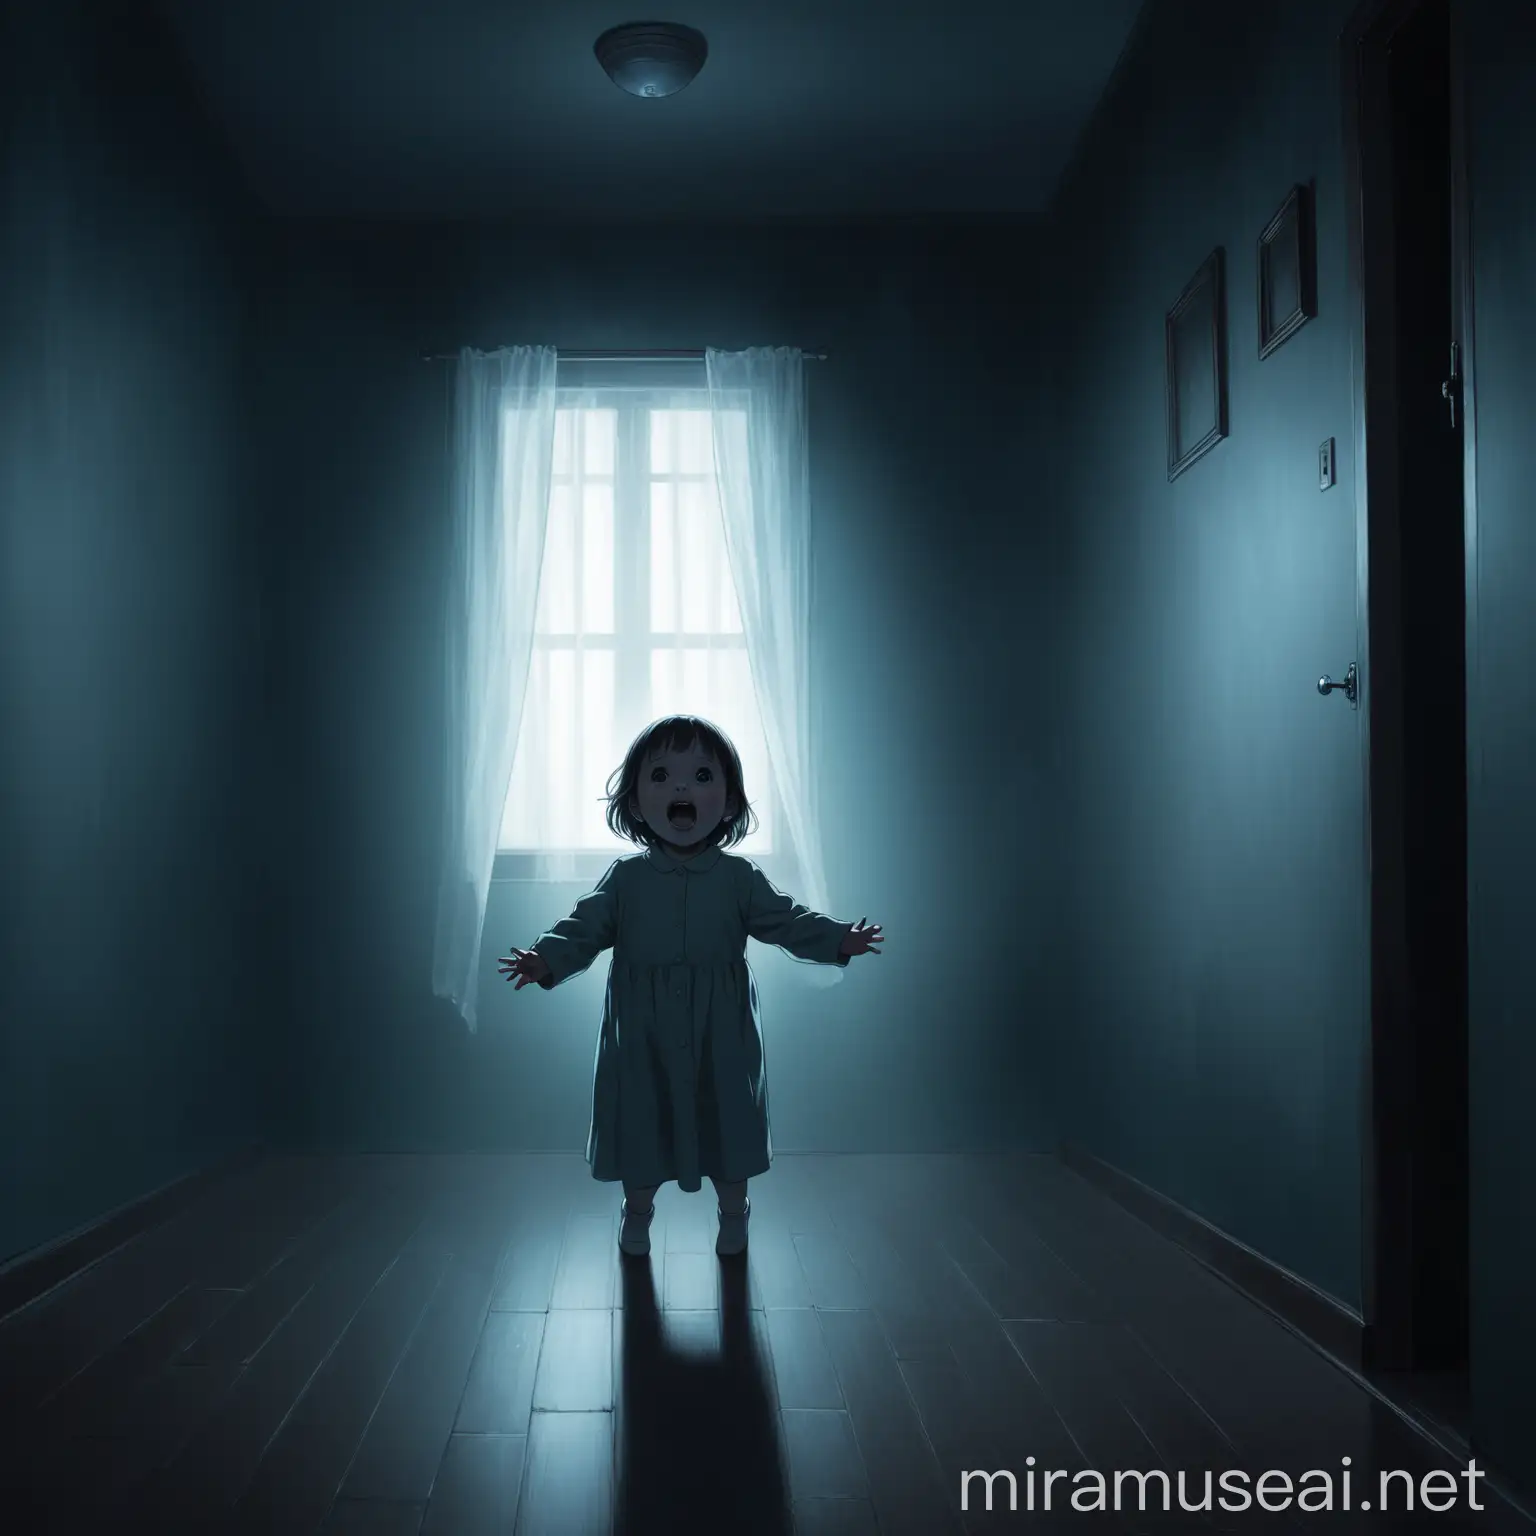 the ghost of a small child screams in the room